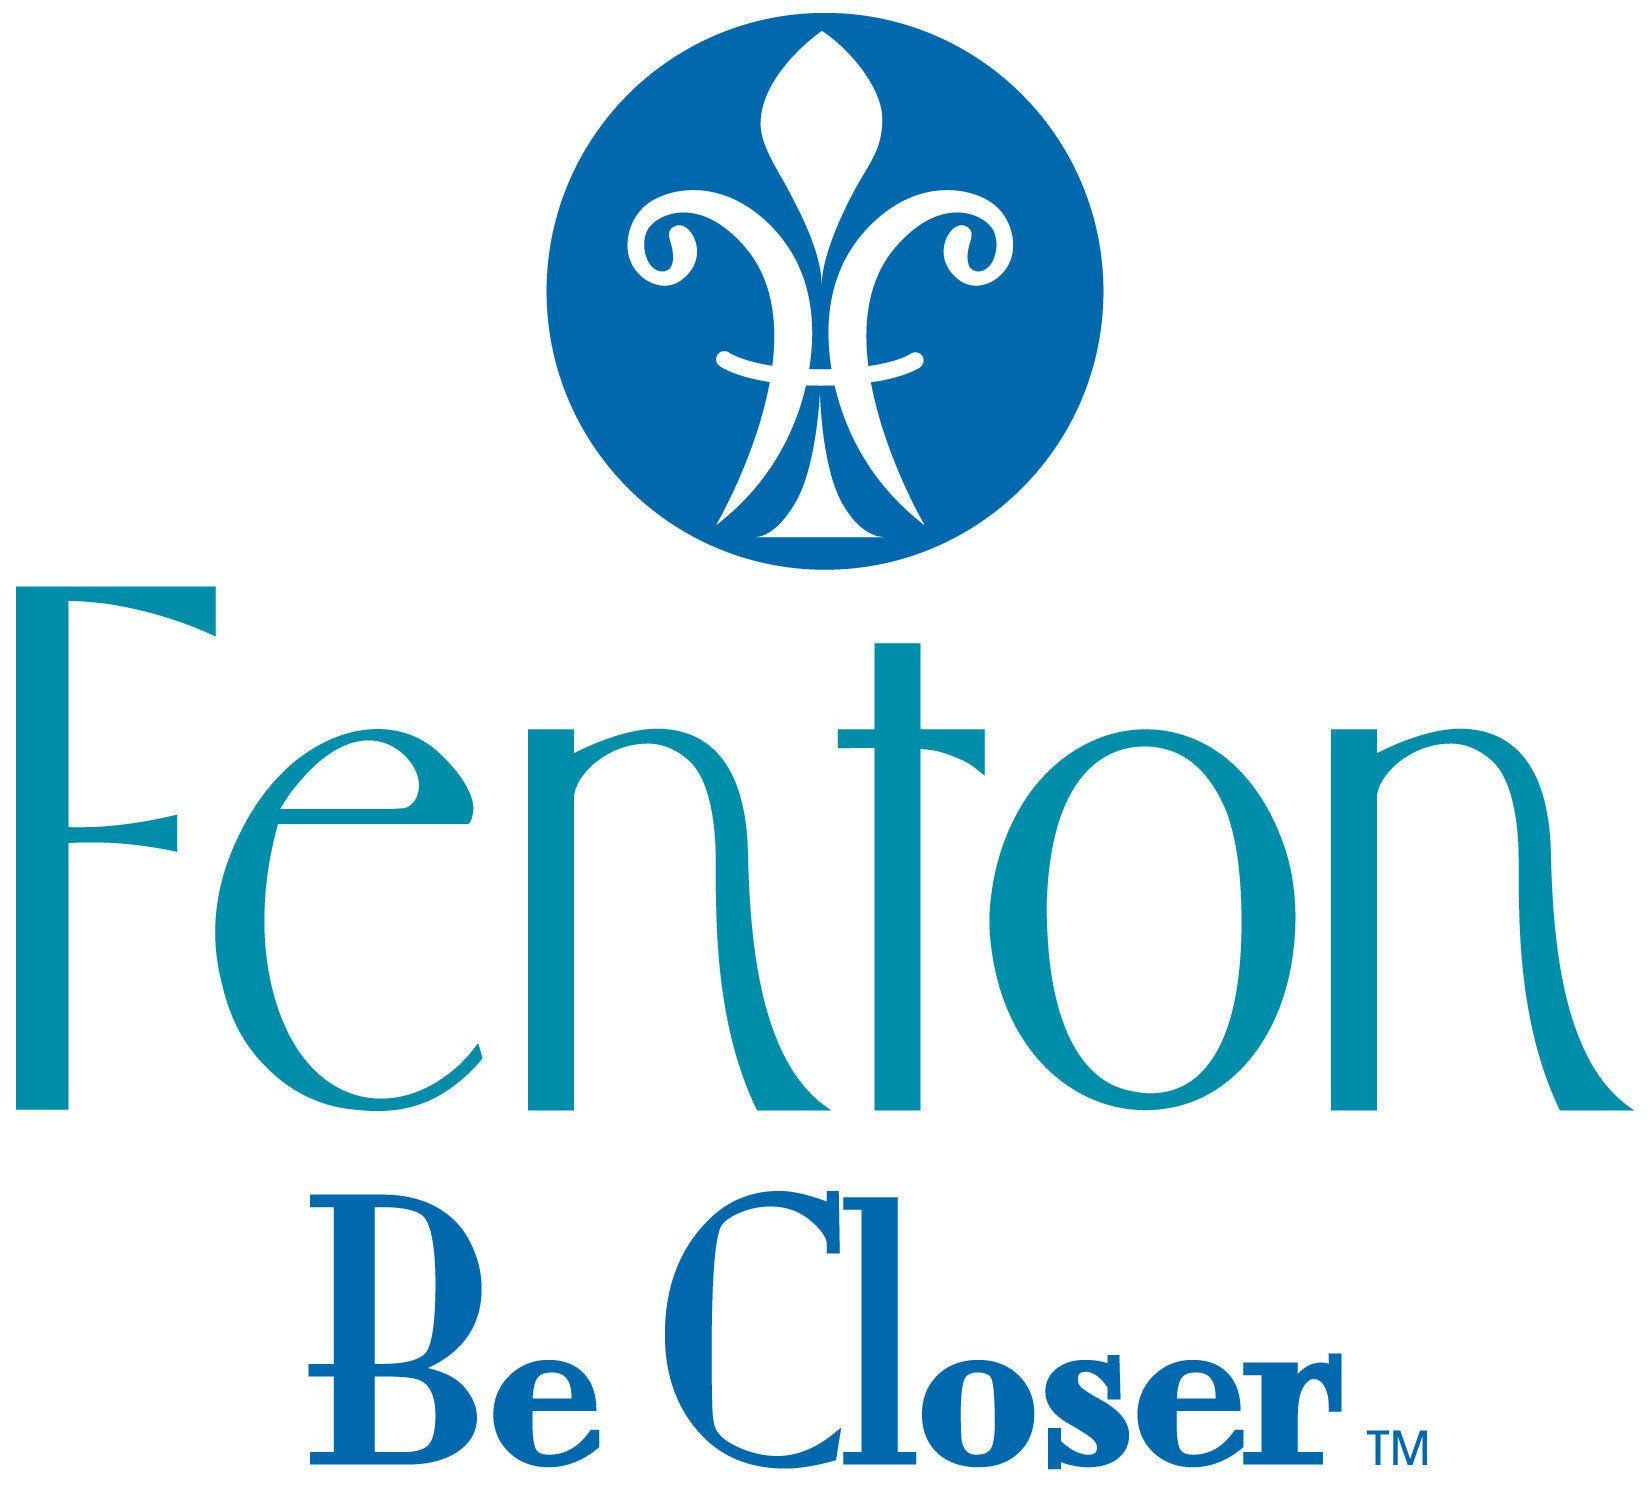 Fenton Logo - Fenton's marketing campaign begins with support from one local ...